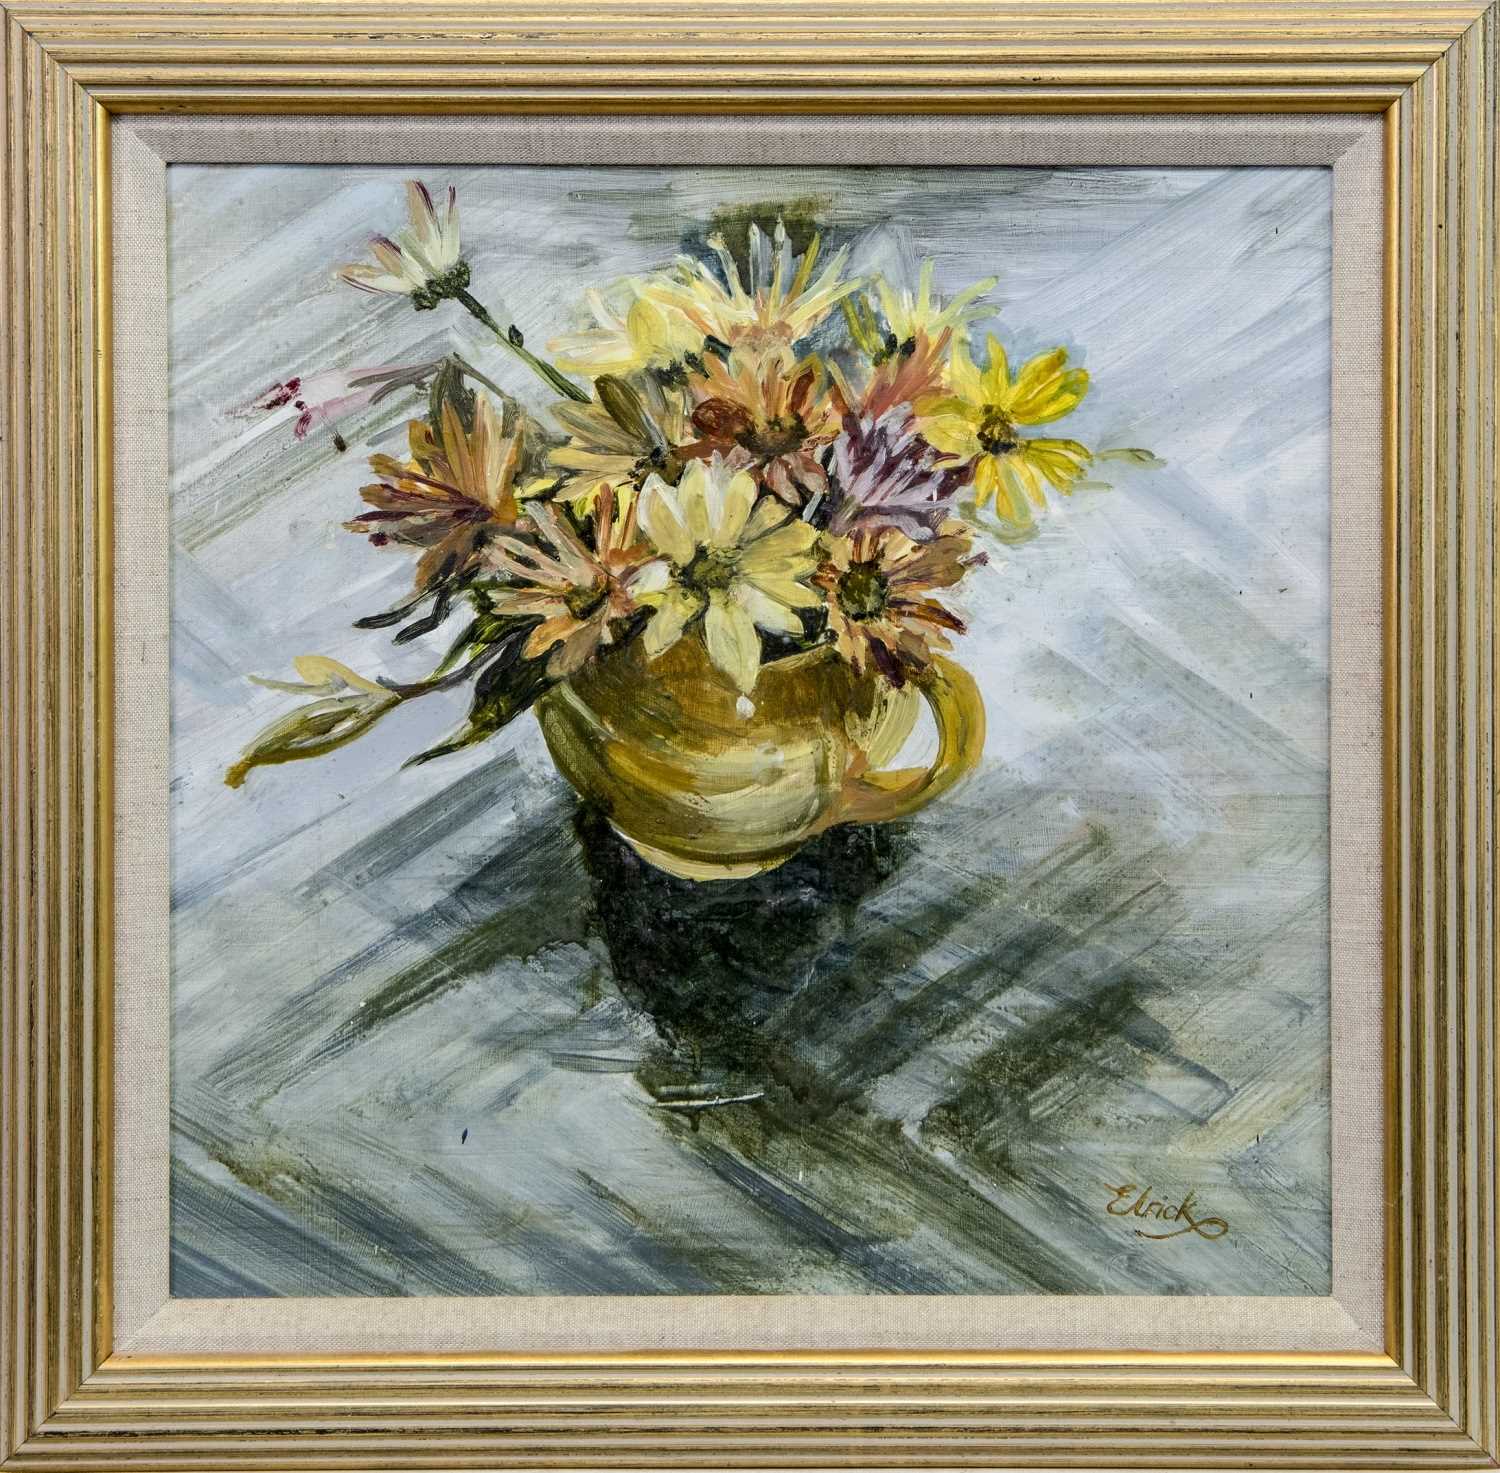 Lot 564 - STILL LIFE WITH FLOWERS, AN OIL BY ELRICK